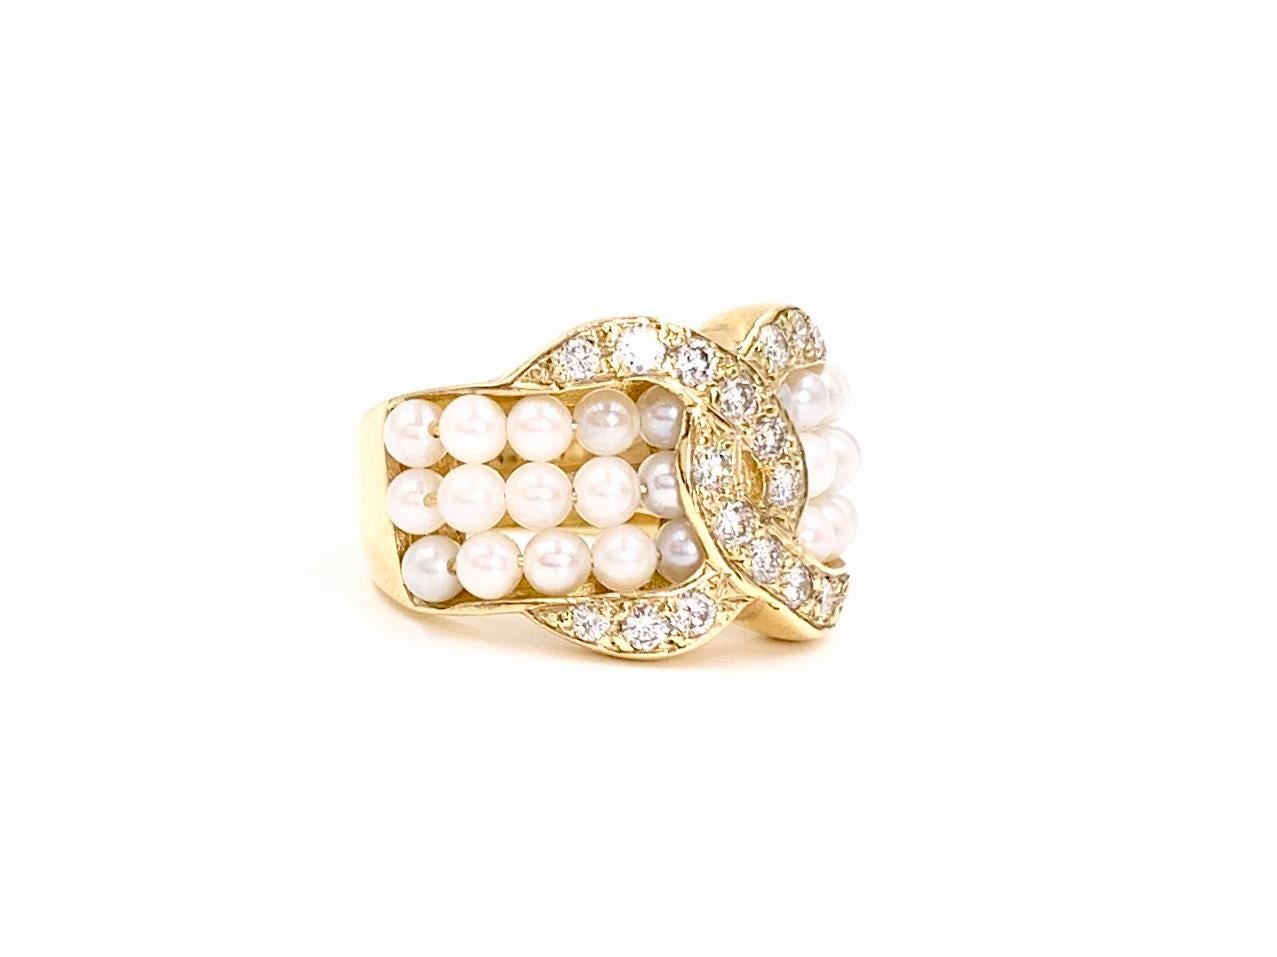 14 Karat yellow gold wide interlocking design ring featuring .50 carat of round brilliant diamonds and three rows of lustrous round ivory seed pearls. Diamond quality is approximately G color, SI1 clarity. Ring has a width of 14mm and tapers to 4mm